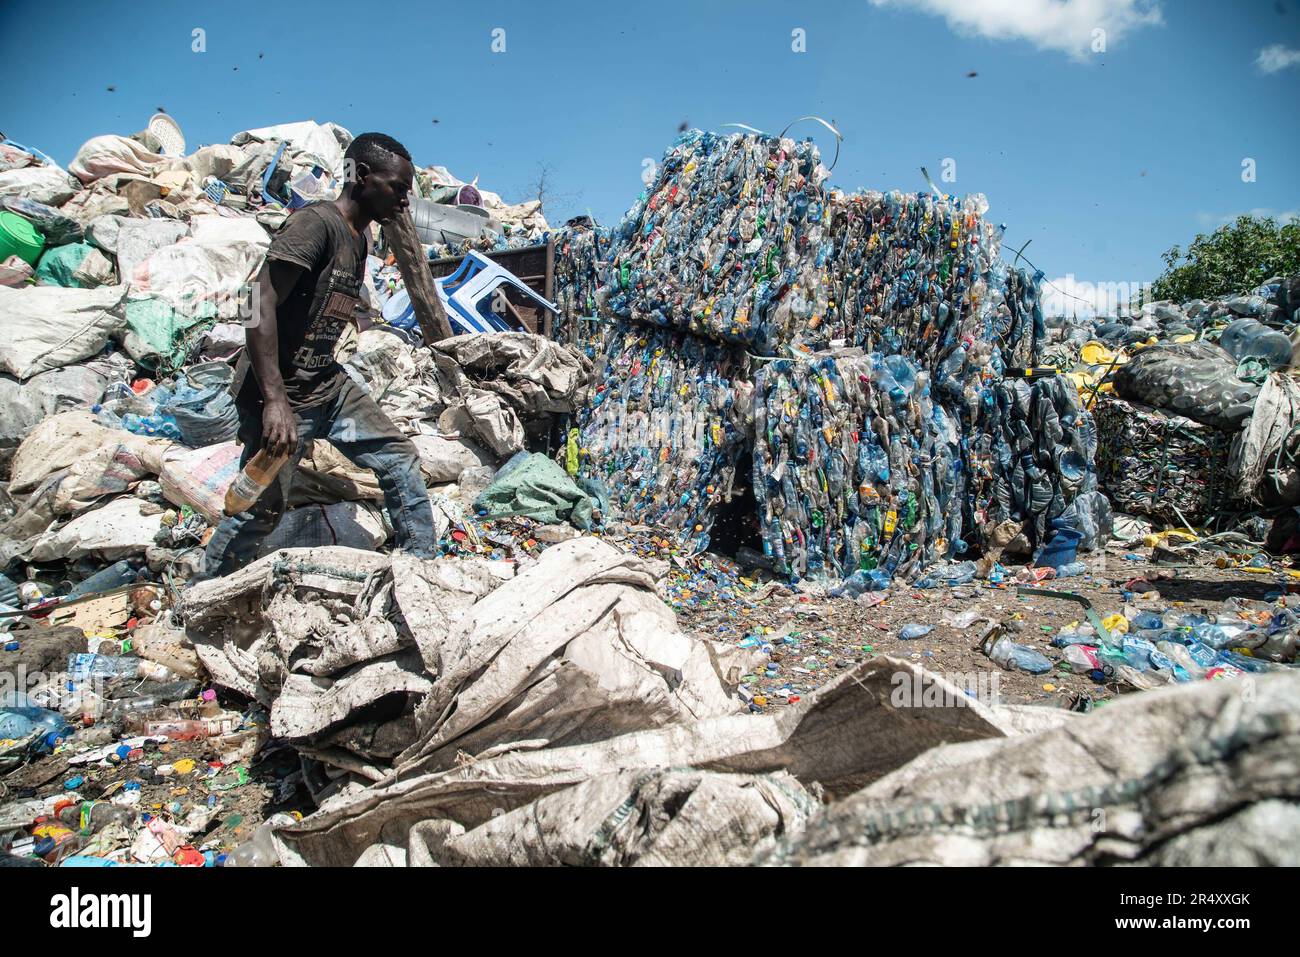 May 30, 2023, Nakuru, Kenya: A worker is seen at a plastic recycling plant in Nakuru. Negotiators have gathered in Paris, France for the second round of deliberations to develop a global treaty aimed at tackling the escalating issue of plastic pollution. According to a recent report by the United Nations Environment Programme (UNEP), countries have the potential to reduce plastic pollution by 80% by 2040 by eliminating unnecessary plastics, implementing recycling and reuse strategies, introducing deposit return schemes, and substituting plastic with sustainable alternative materials. (Credit I Stock Photo